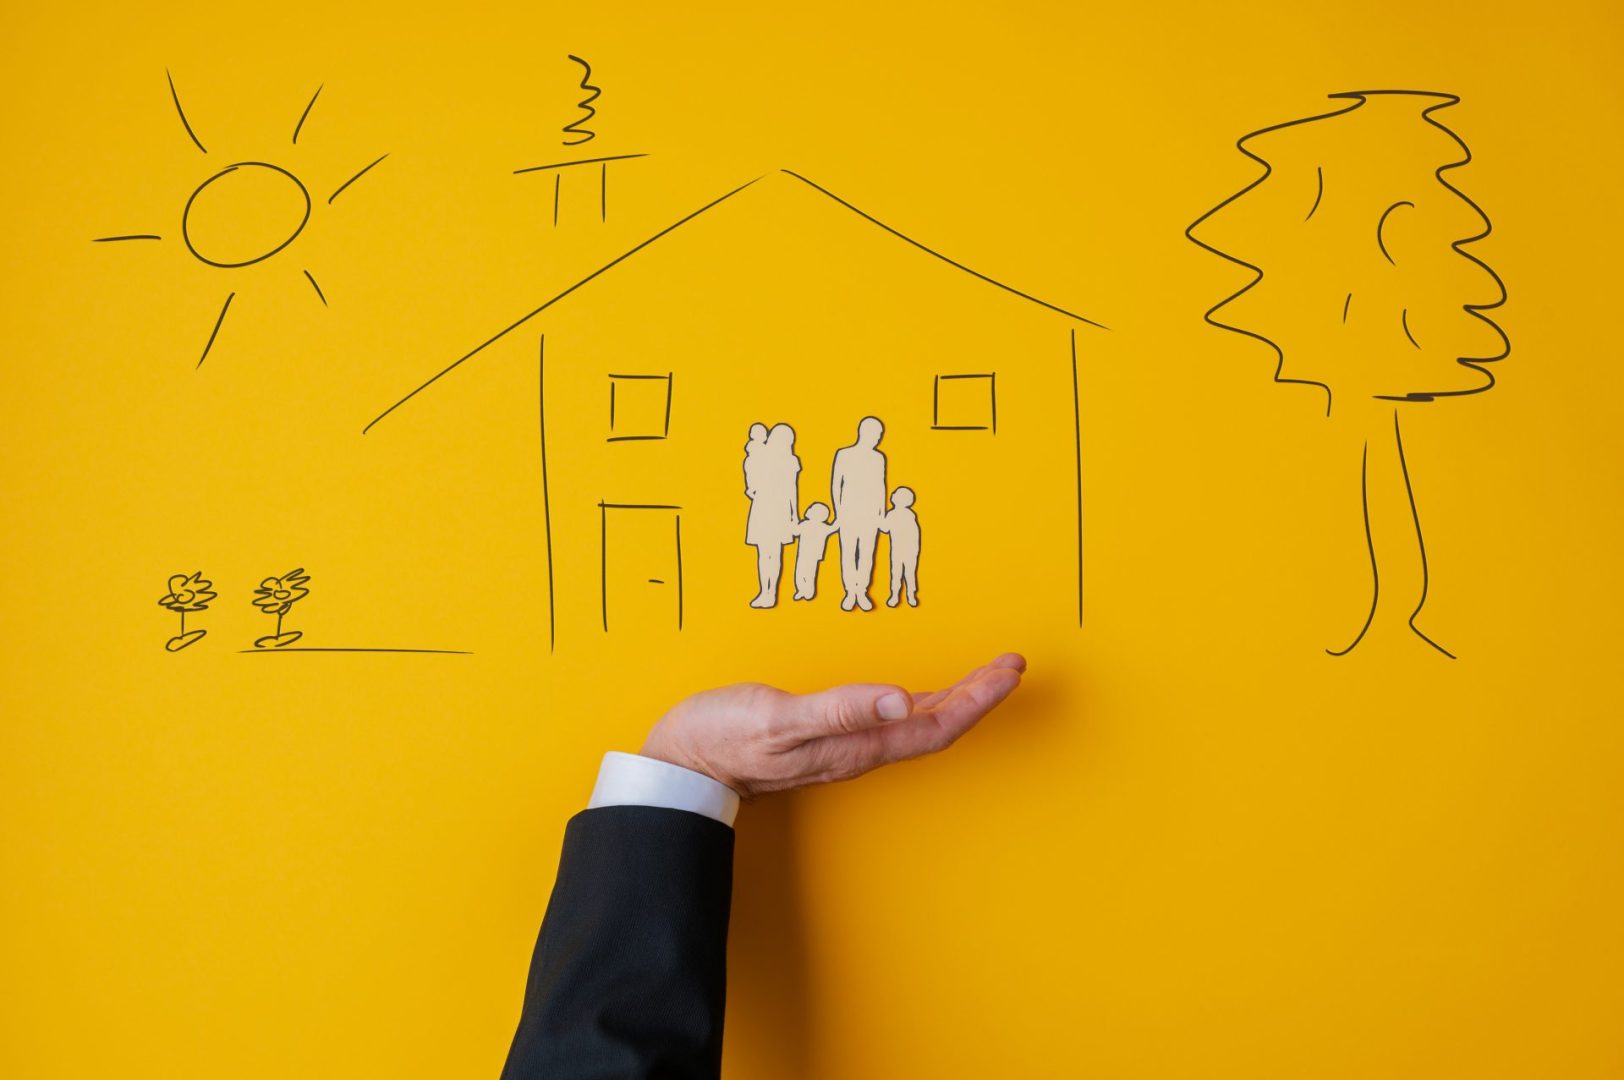 Male hand in a suit in supportive gesture under a hand drawn house with a paper cut silhouette of a family inside in conceptual image. Over yellow background.